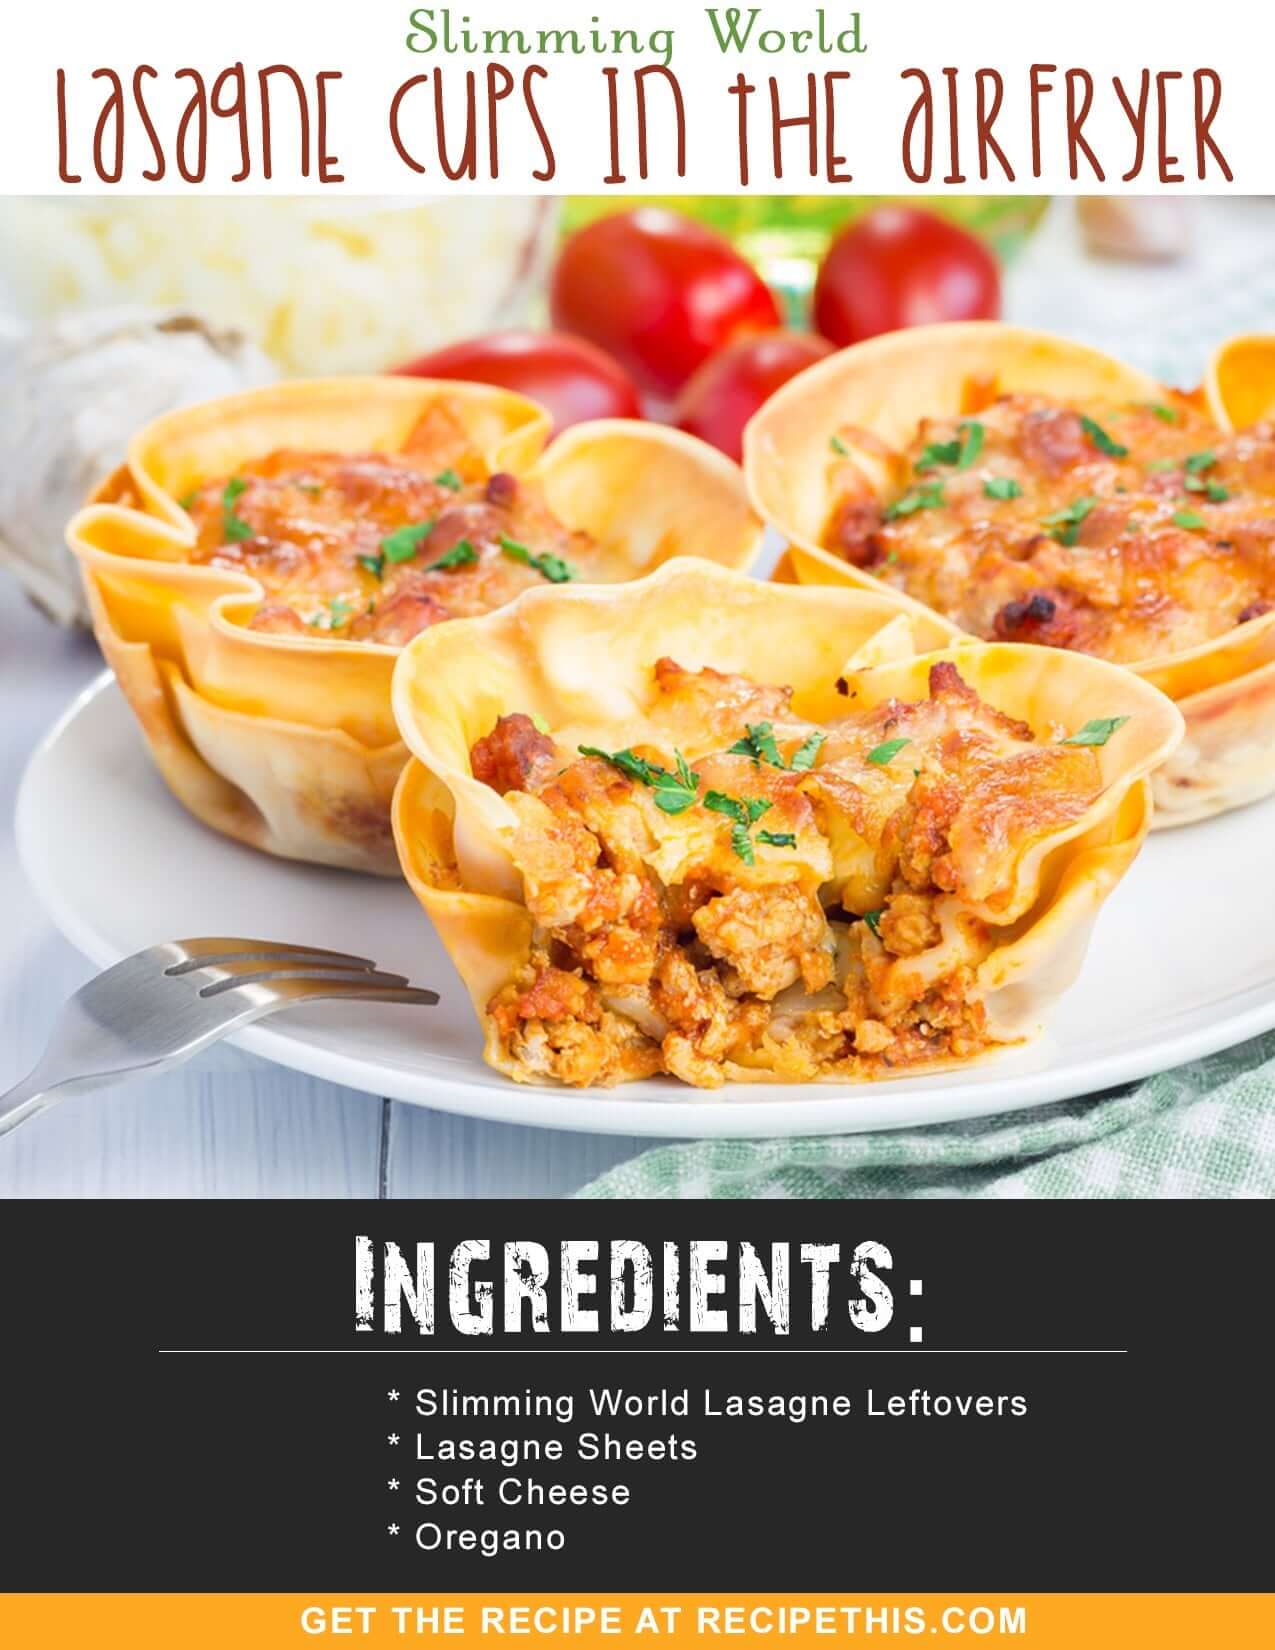 Airfryer Recipes | Slimming World Lasagne Cups In The Airfryer Recipe from RecipeThis.com